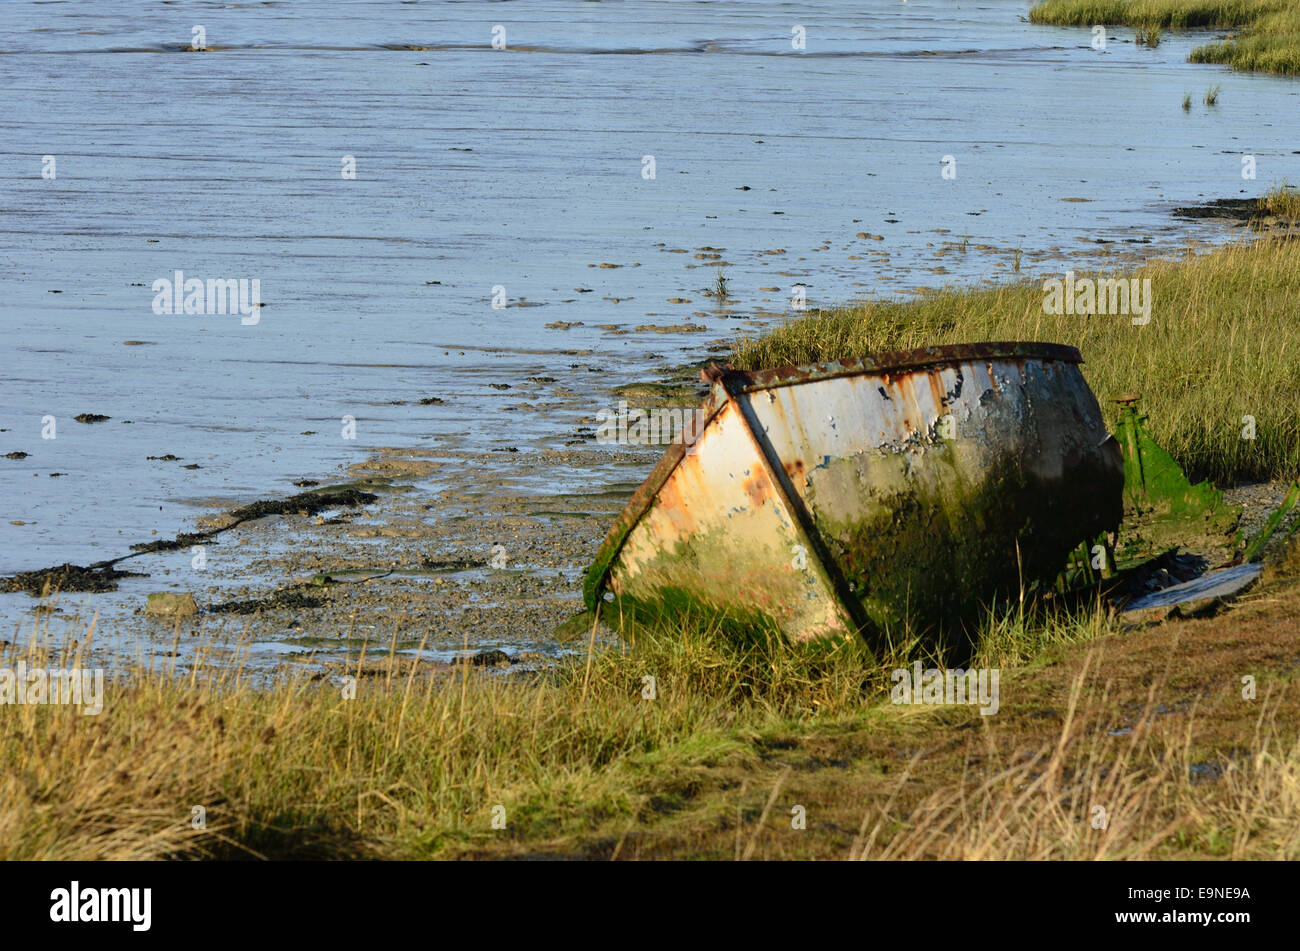 Old Dingy in Creek Stock Photo